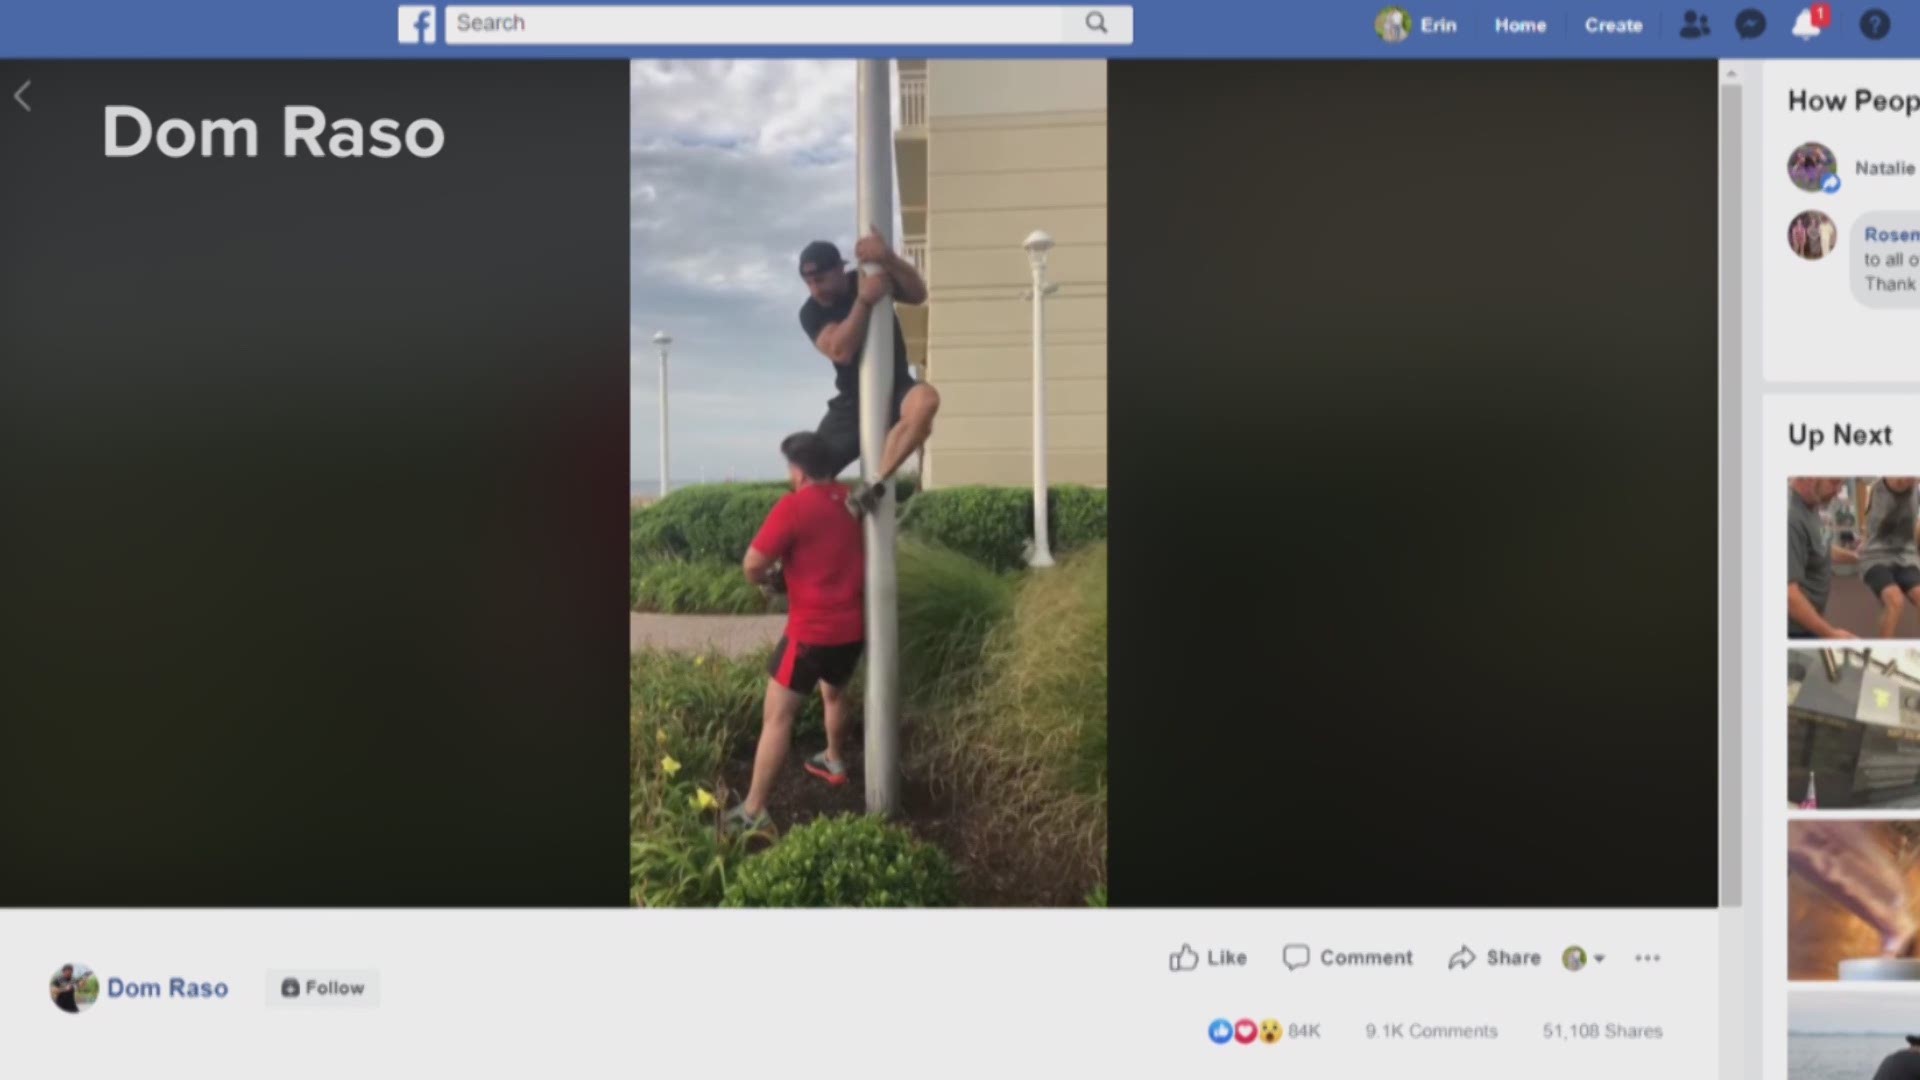 A Navy SEAL climbed a flag pole at the Virginia Beach Oceanfront to fix an American flag. He finally made it to the top after three failed attempts. (Video Credit: Dom Raso on Facebook)